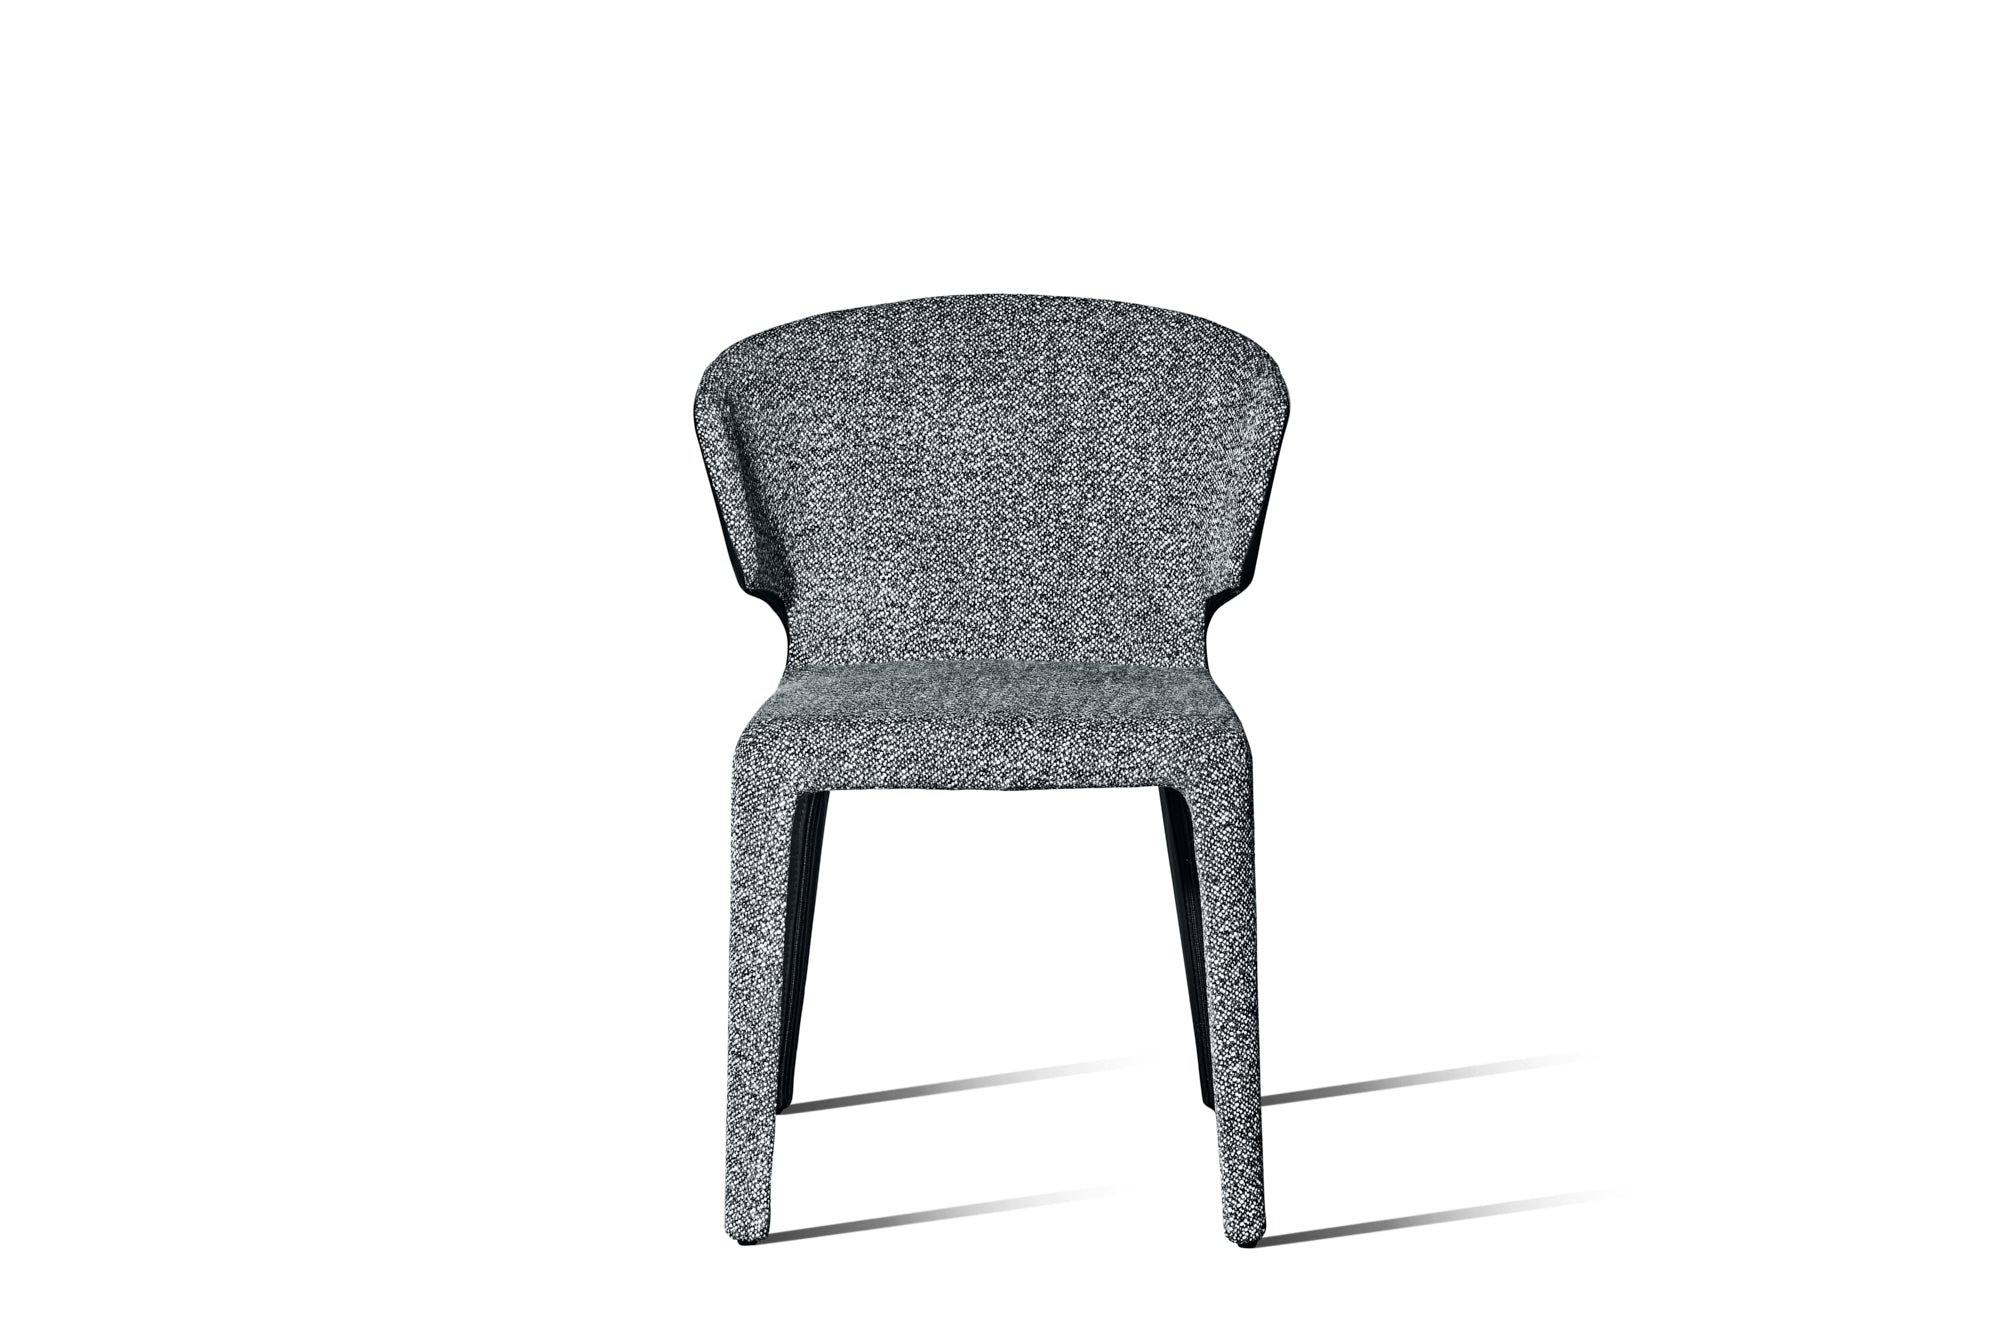 Husk Two Tone Black Freckle Fabric Chair - 60% OFF - Set of Five - Zuster Furniture